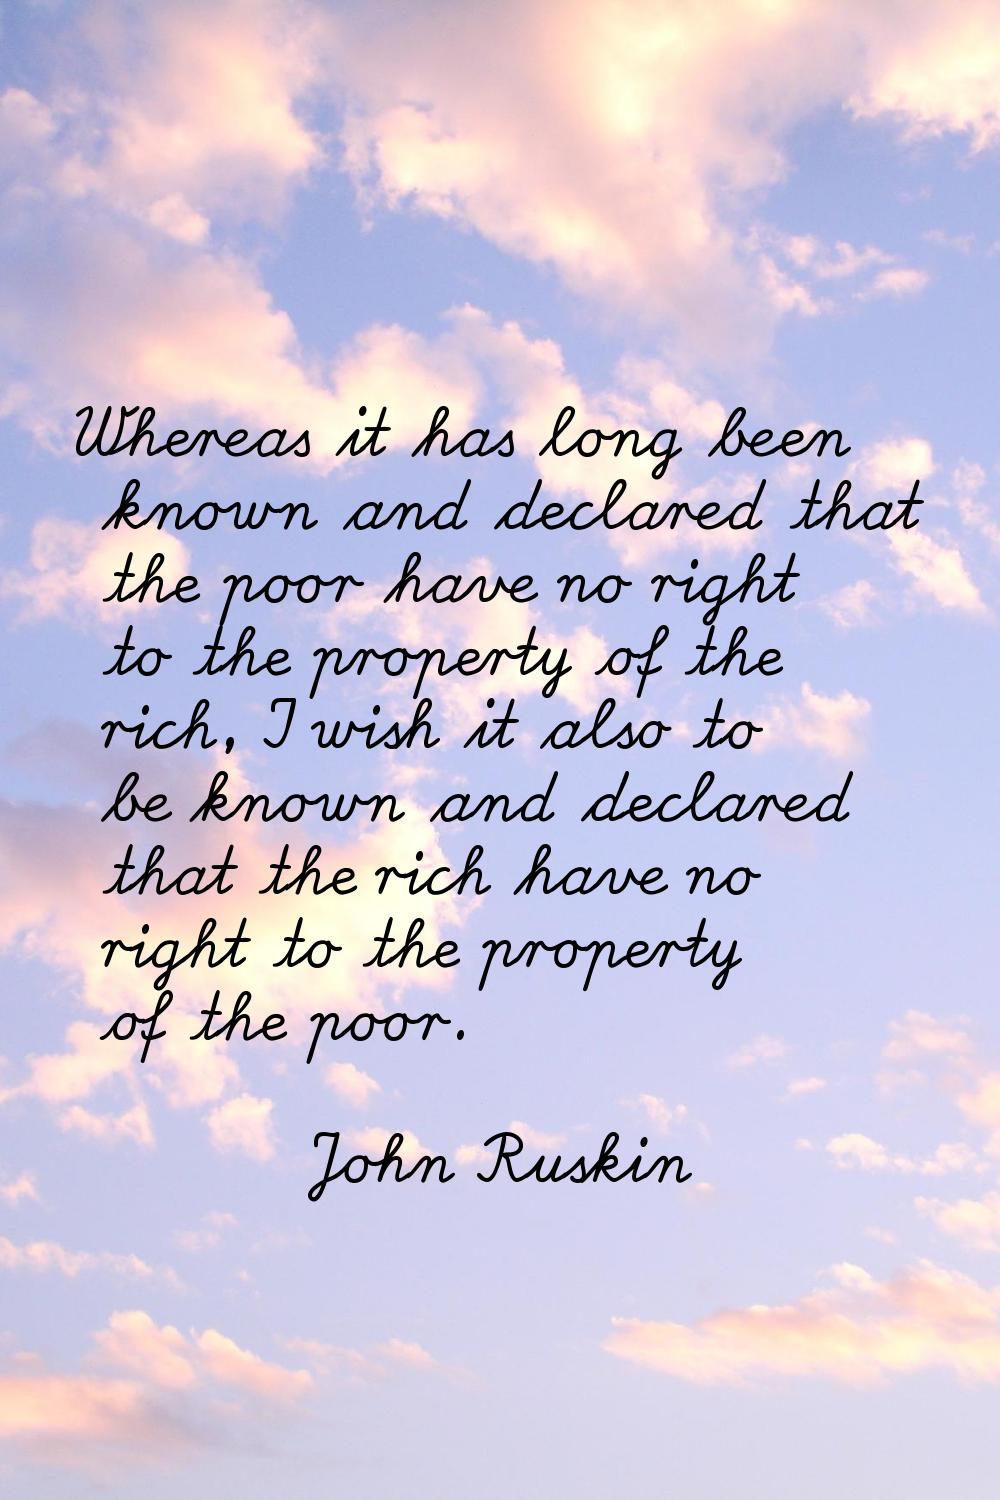 Whereas it has long been known and declared that the poor have no right to the property of the rich